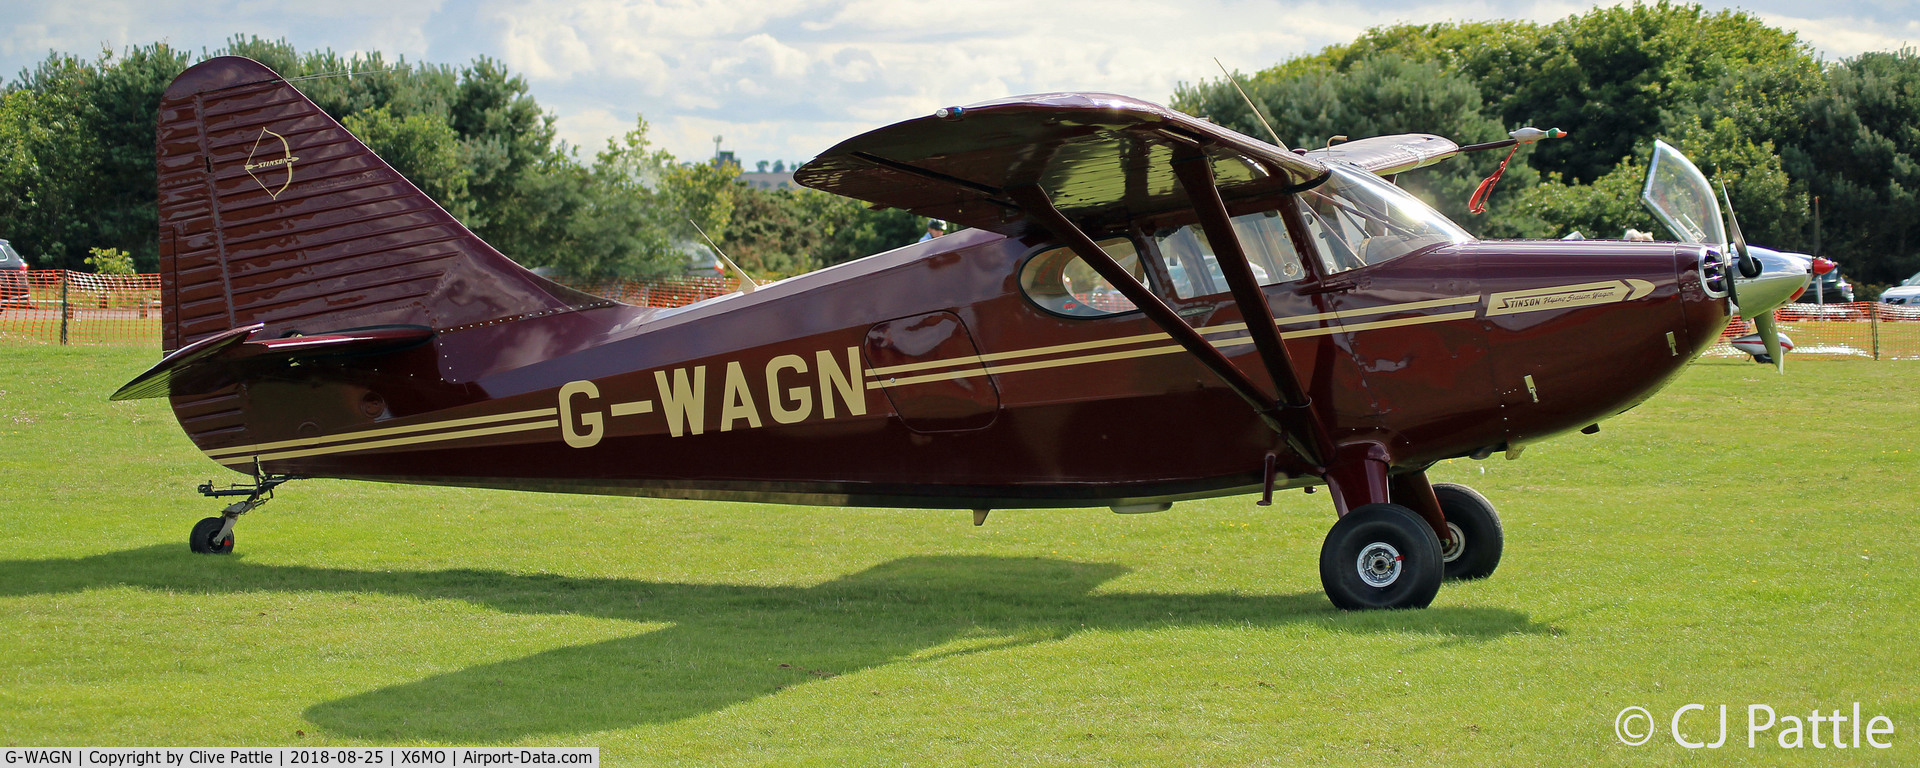 G-WAGN, 1948 Stinson 108-3 Voyager C/N 108-4216, Present at the Montrose Air Station Heritage Centre light aircraft fly-in held on 25th August 2018.